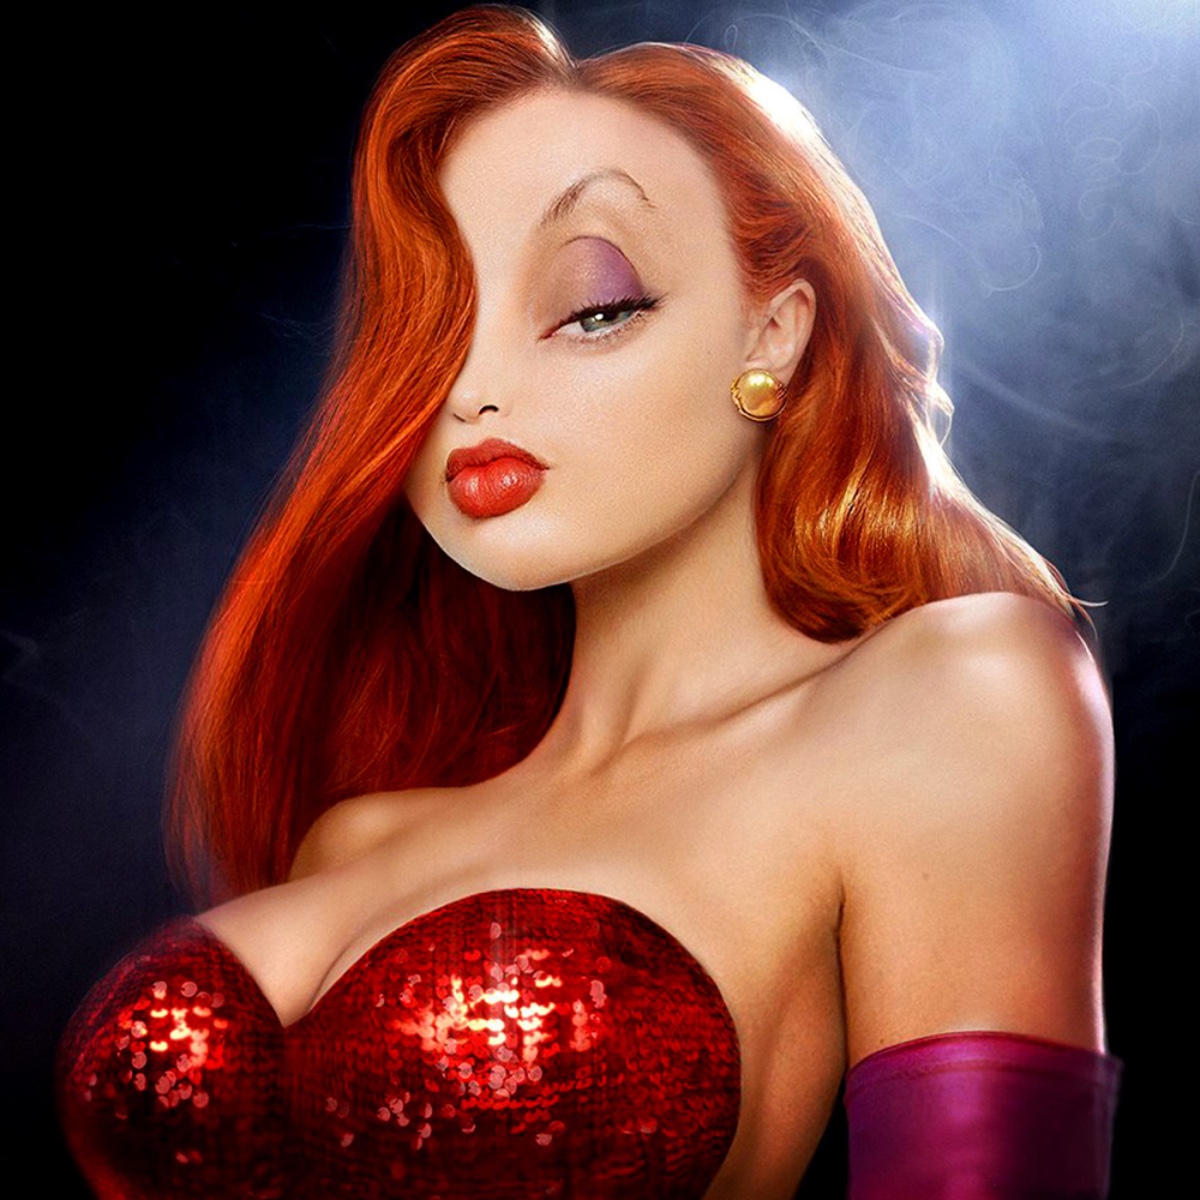 Jessica Rabbit Costume - Who Framed Roger Rabbit Fancy Dress - Red Wig and Hair